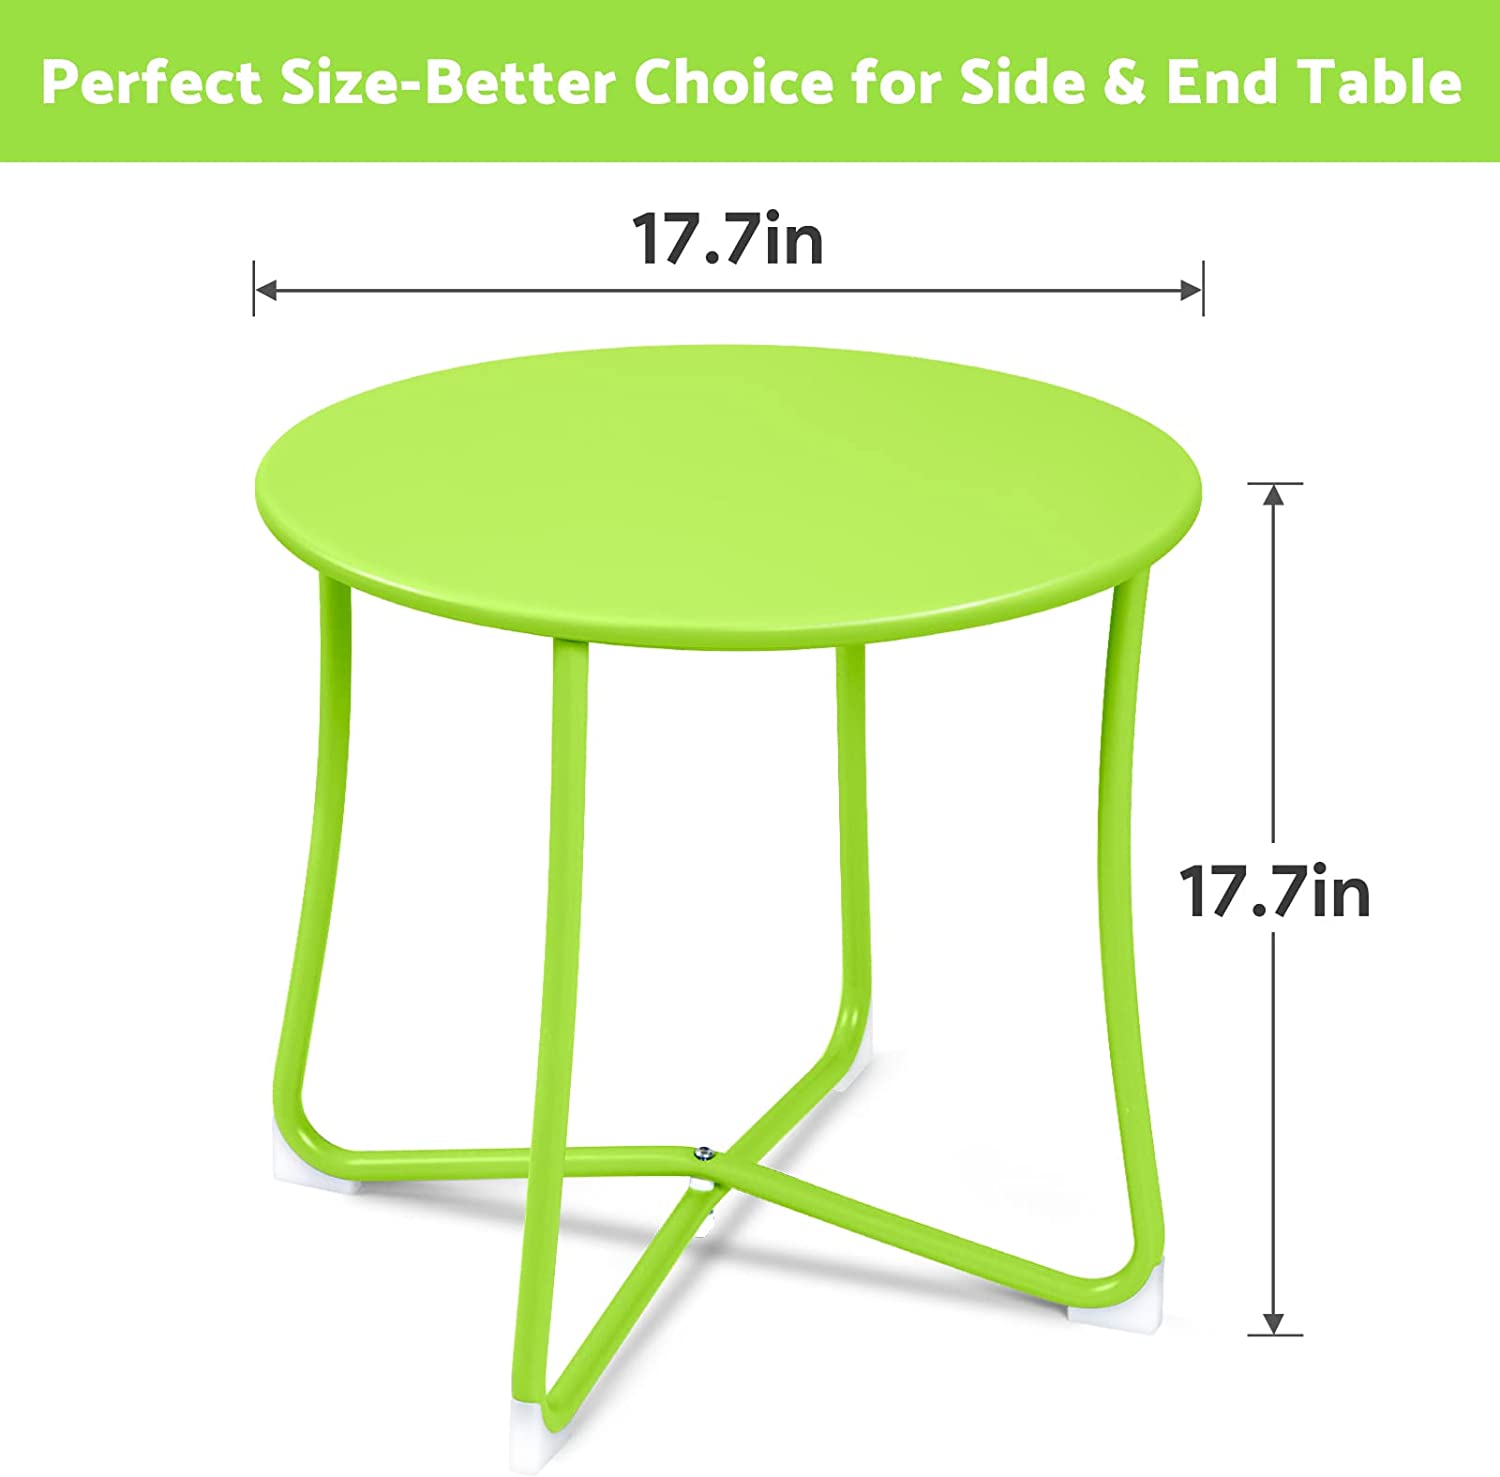 Amagabeli Metal Patio Side Table 18 x 18 Heavy Duty Weather Resistant Anti-Rust Outdoor End Table Small Steel Round Coffee Table Porch Table Snack Table for Balcony Garde Lime Green - image 2 of 8